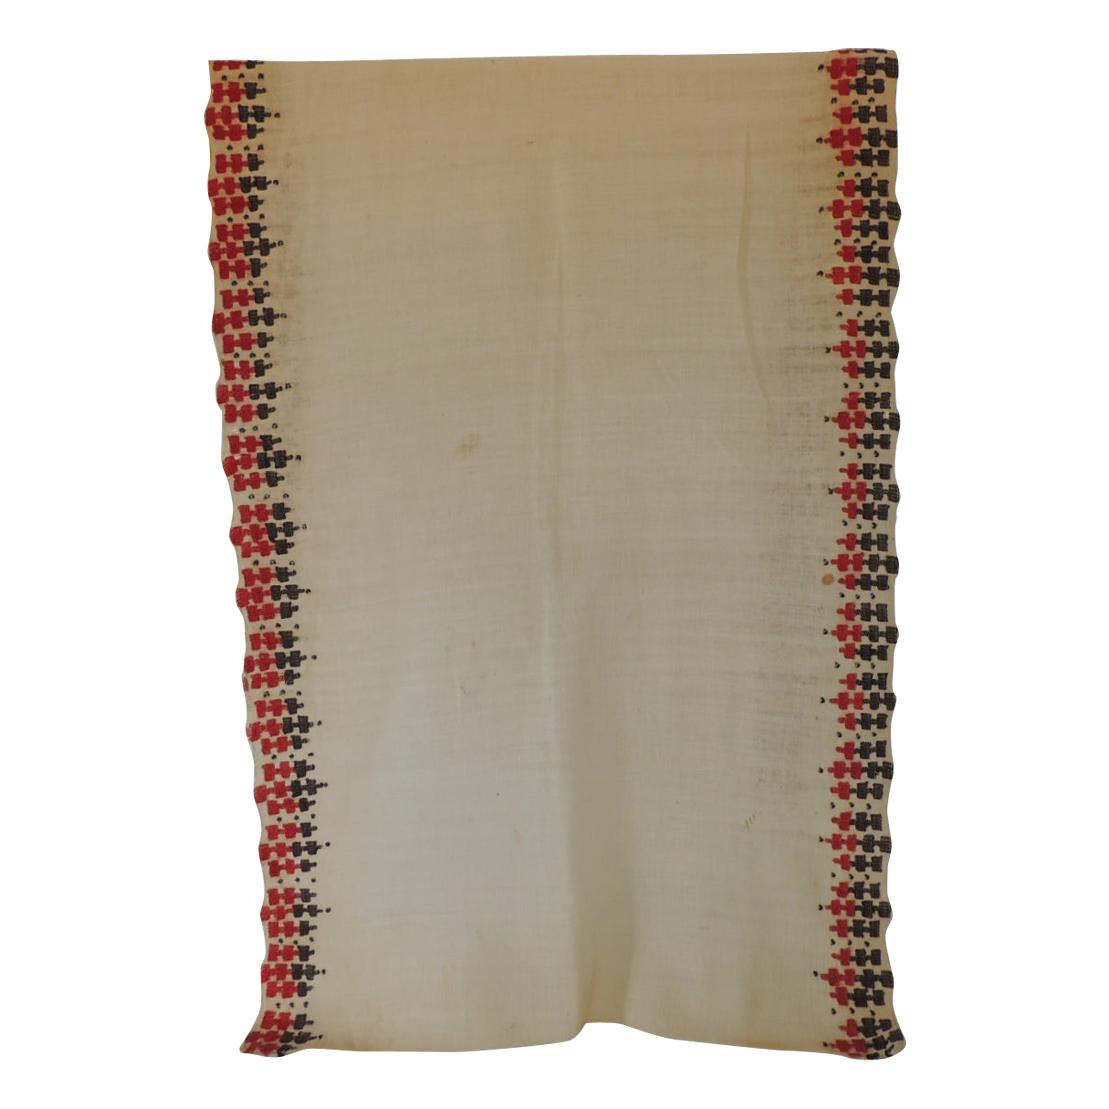 Floral Embroidered Turkish Sheer Textile Scarf or Table Runner